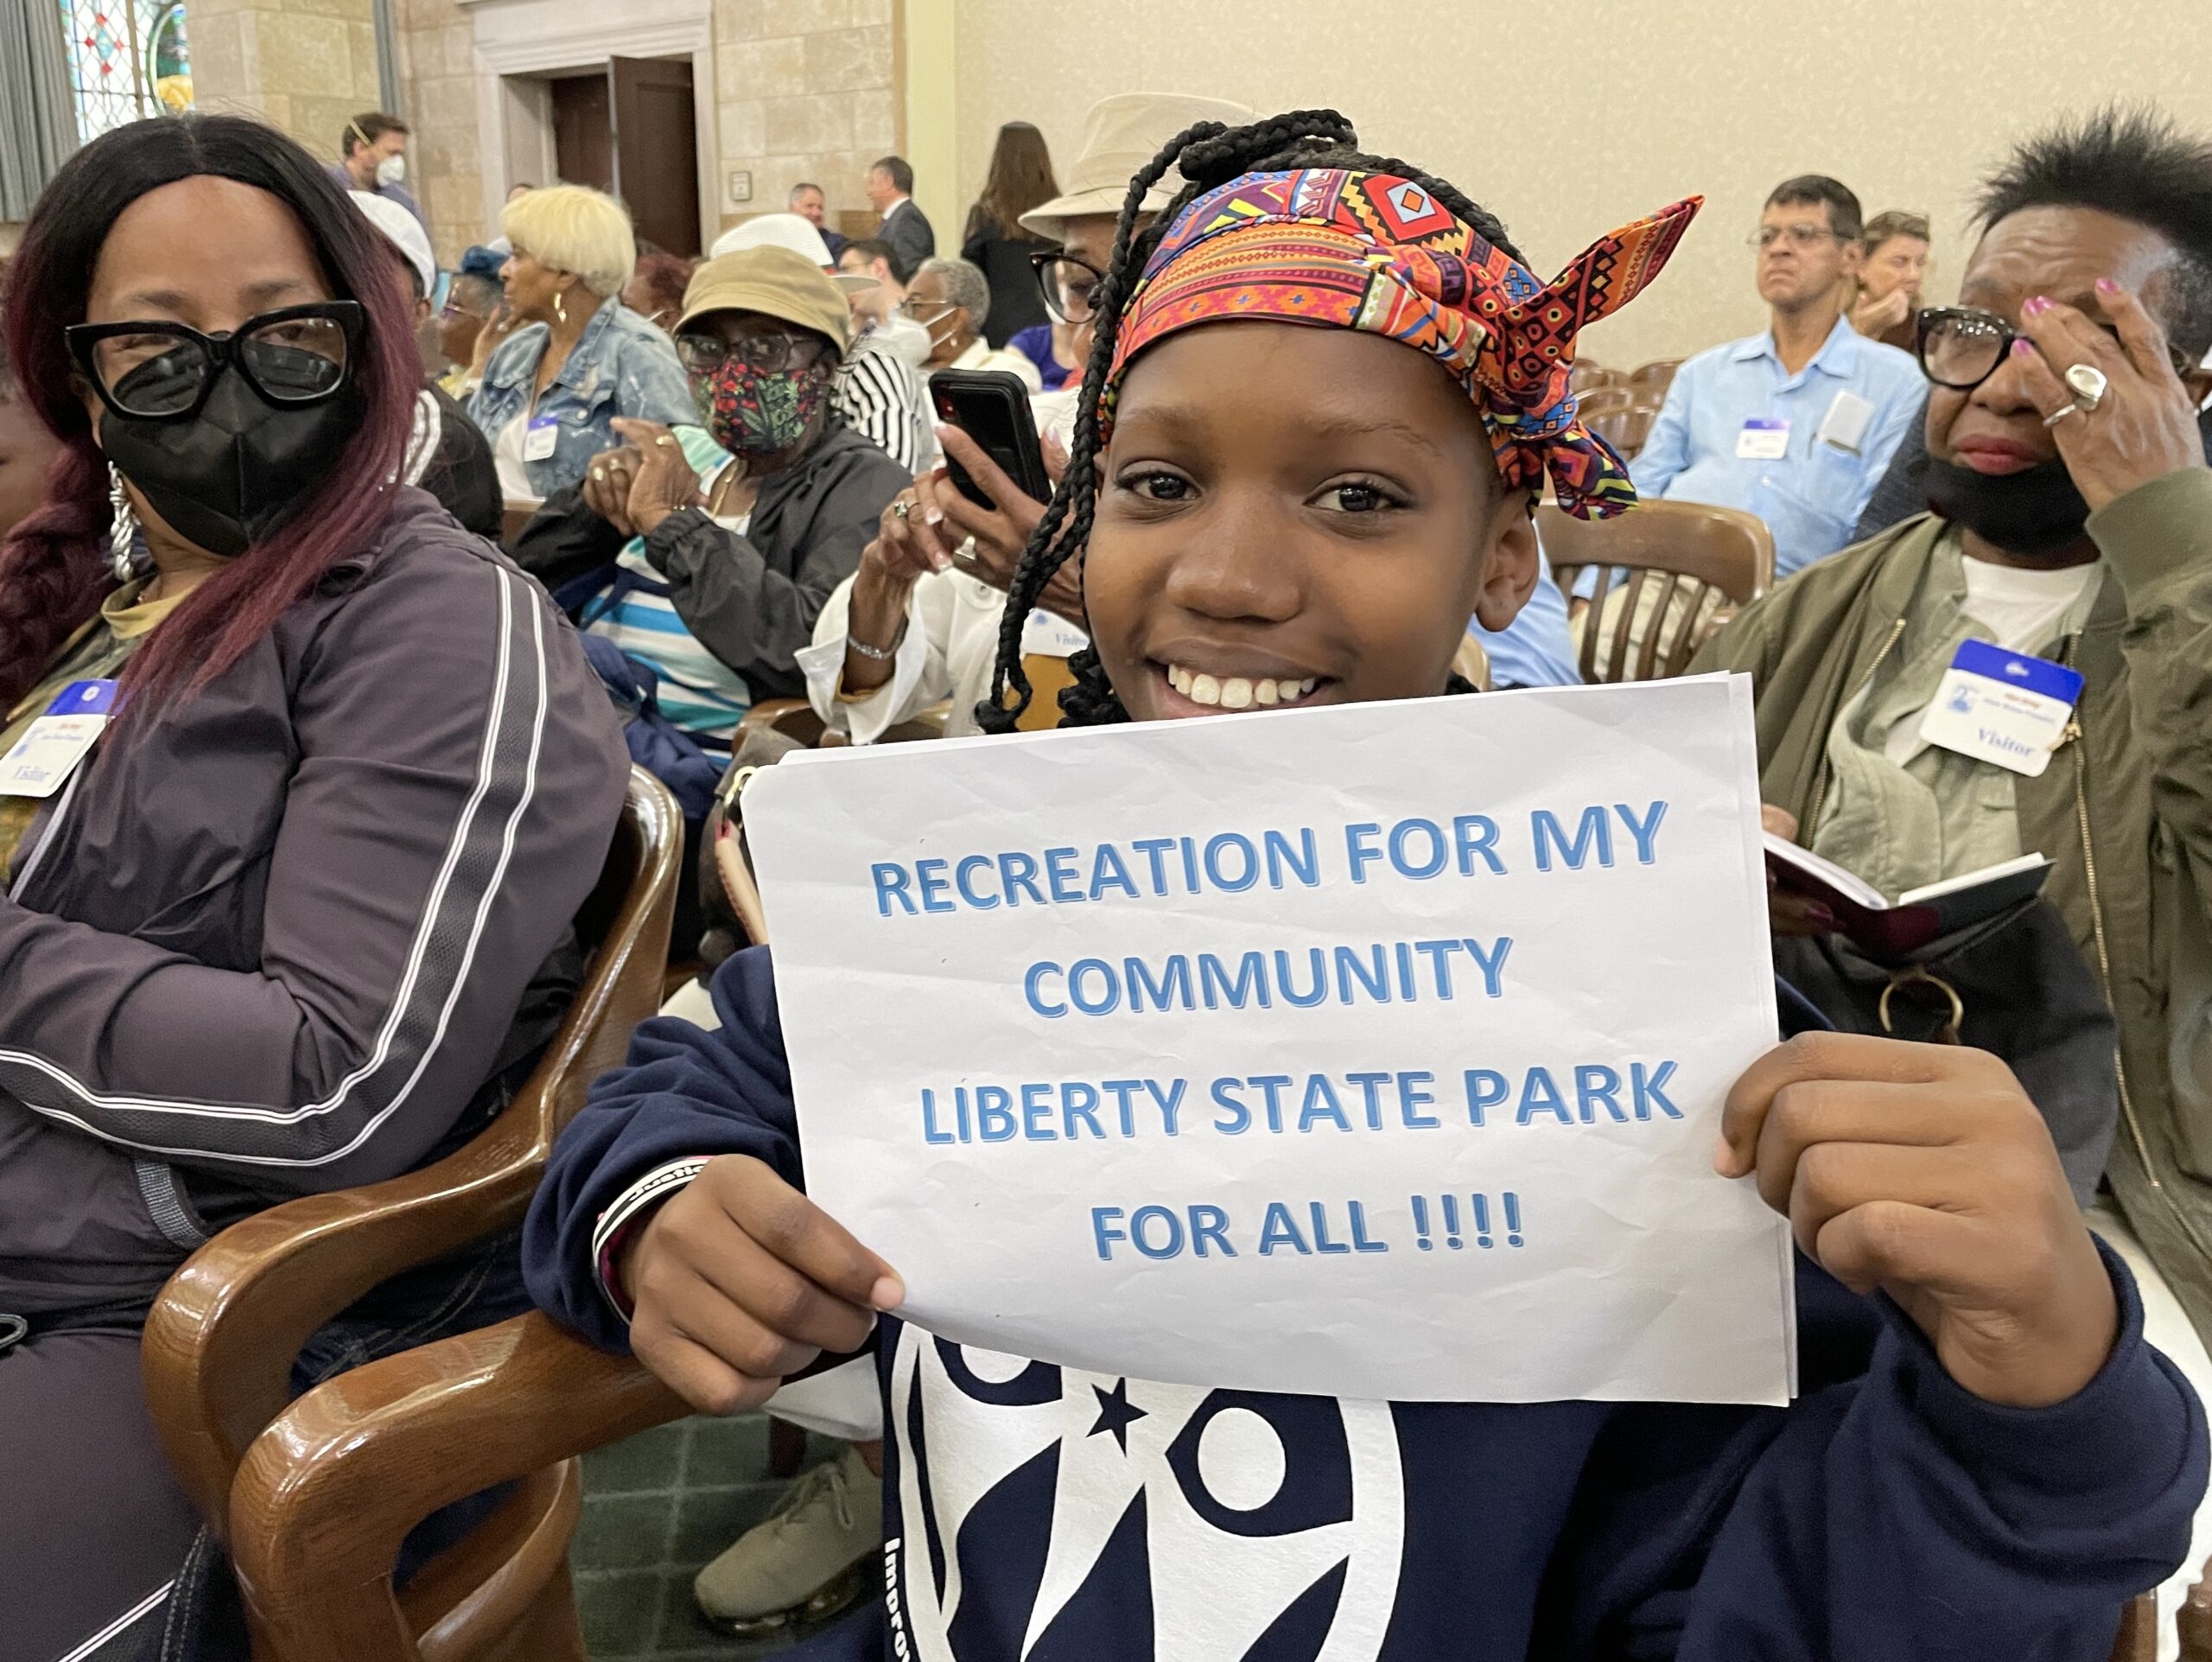 A child sitting in an audience of people holds a sign stating "RECREATION FOR MY COMMUNITY LIBERTY STATE PARK FOR ALL!!!!"